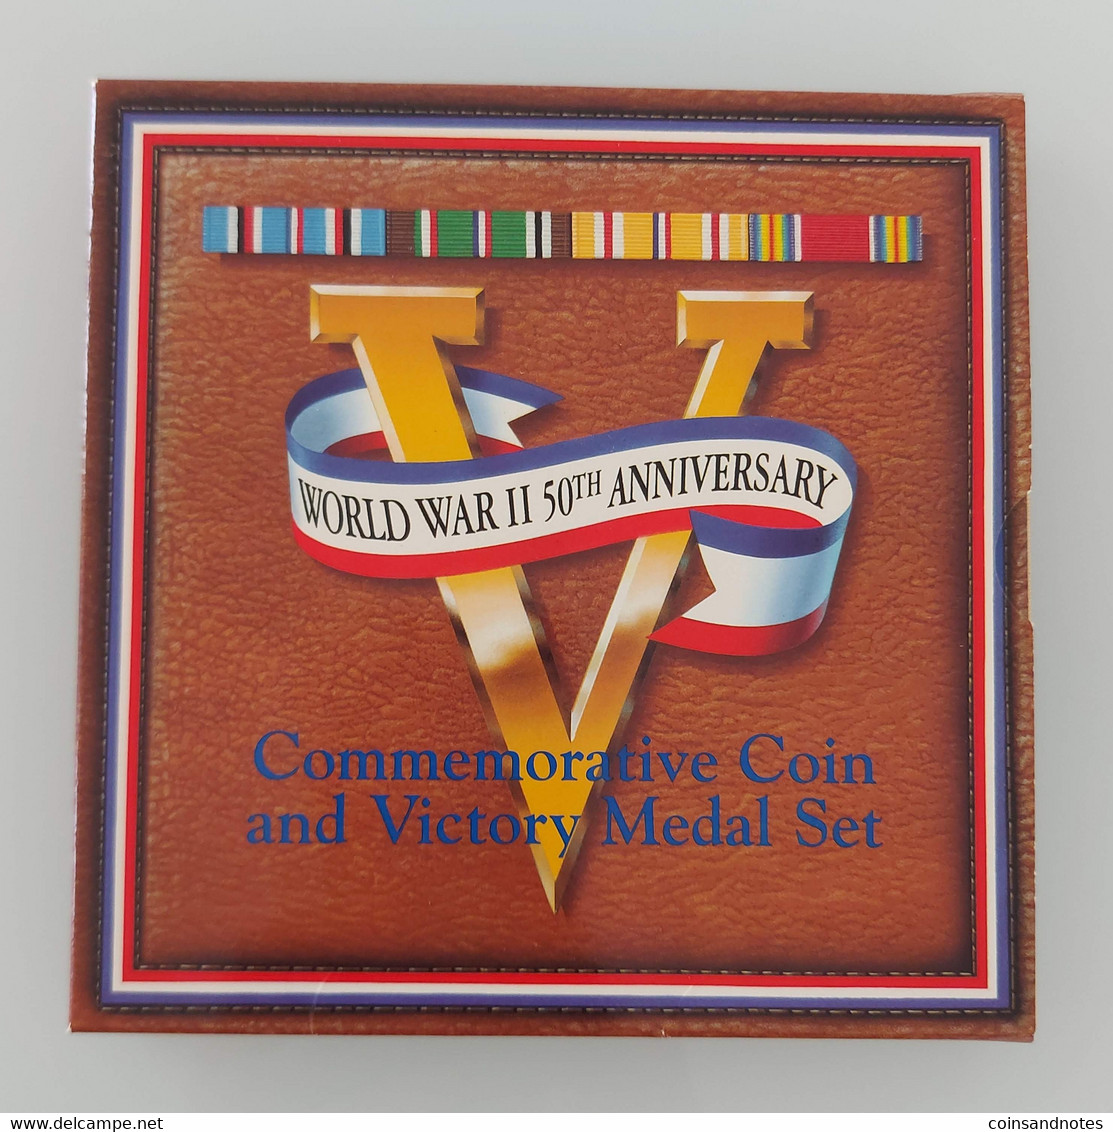 USA 1993 - Comm. Coin & Victory Medal Set 'WWII 50th Anniversary’ - COA - Verzamelingen